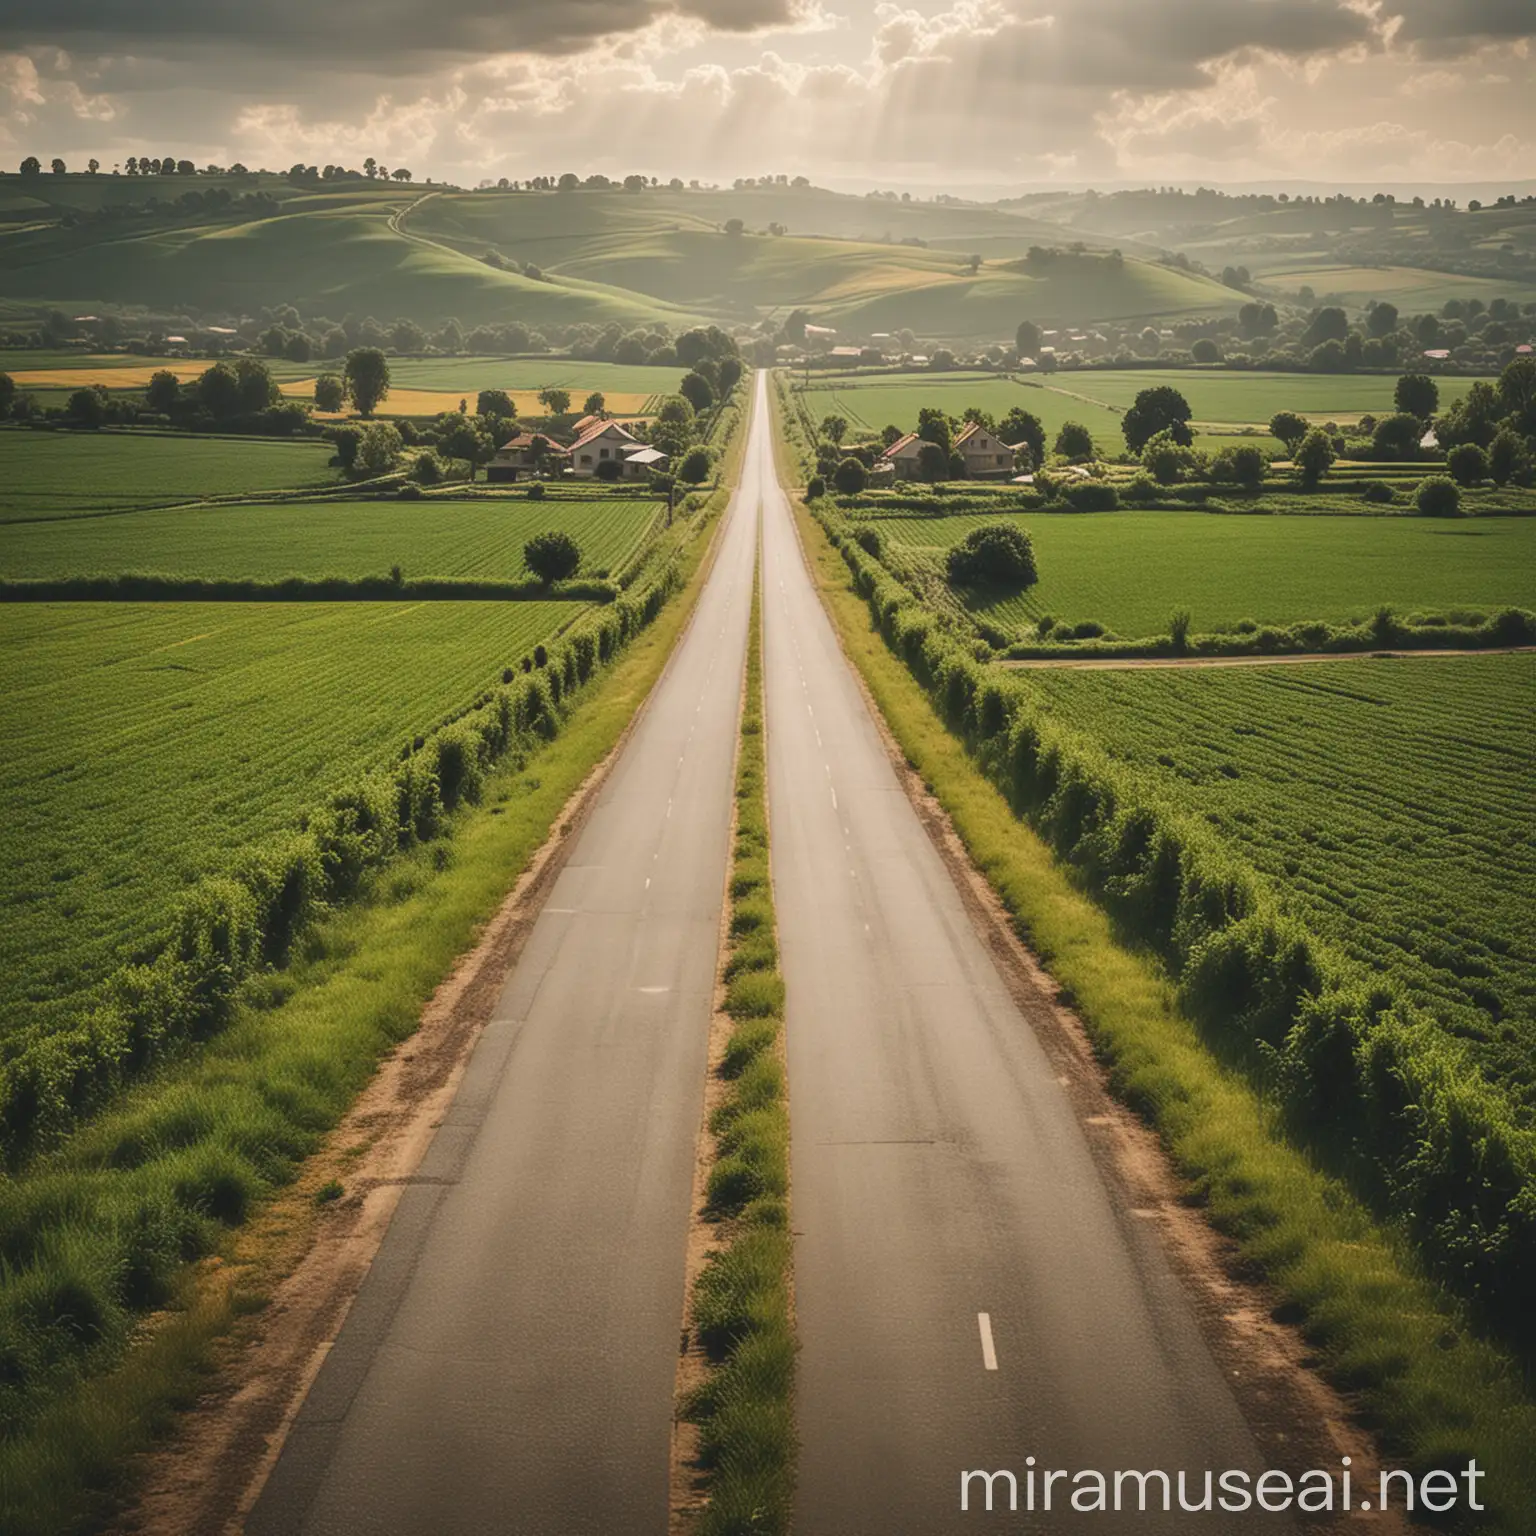 Tranquil Indian Countryside Serene Rural Road Amid Lush Green Fields